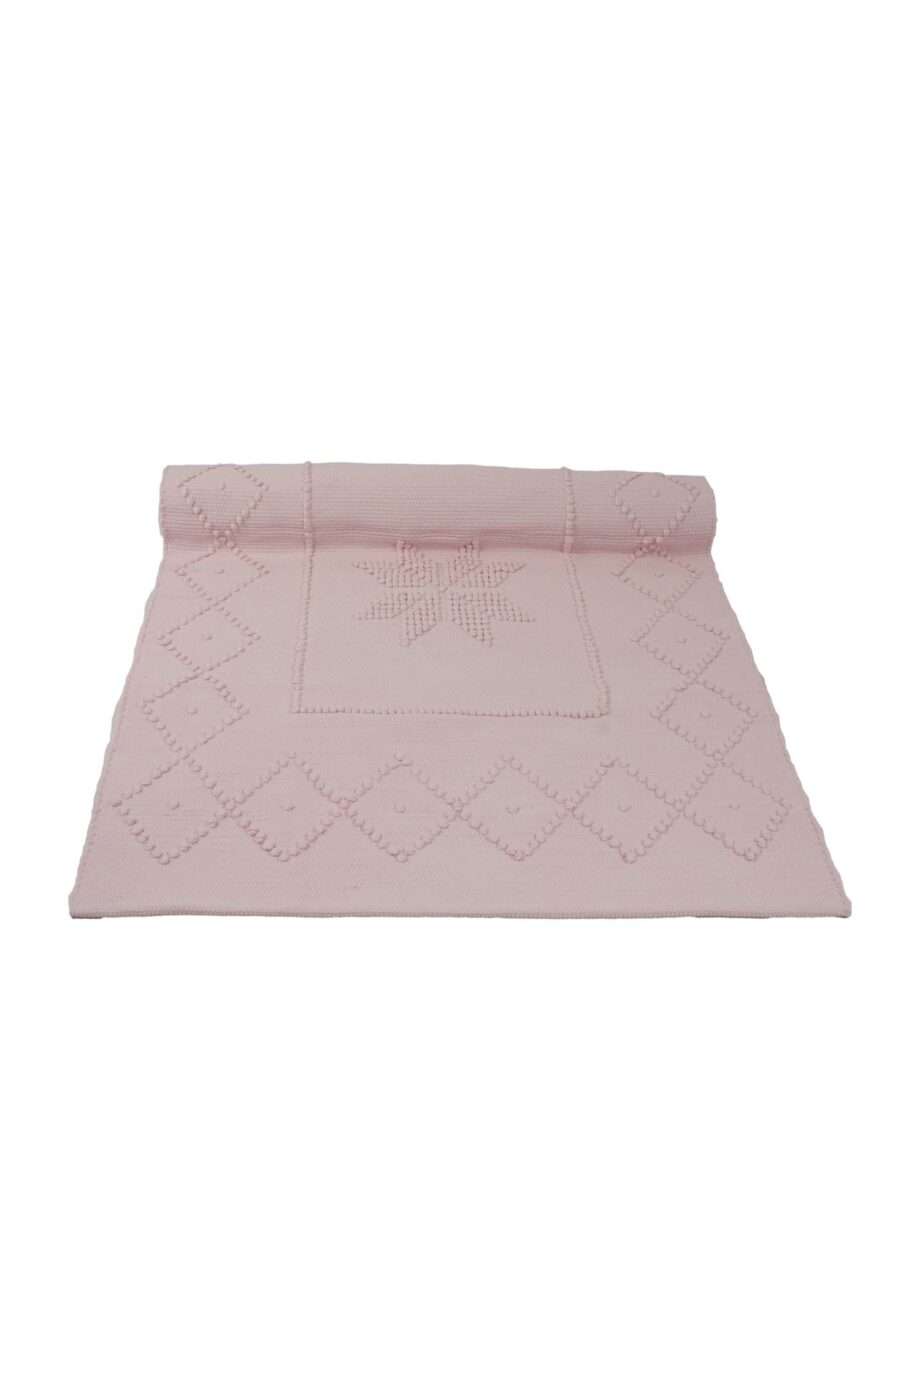 star baby pink woven cotton floor mat small